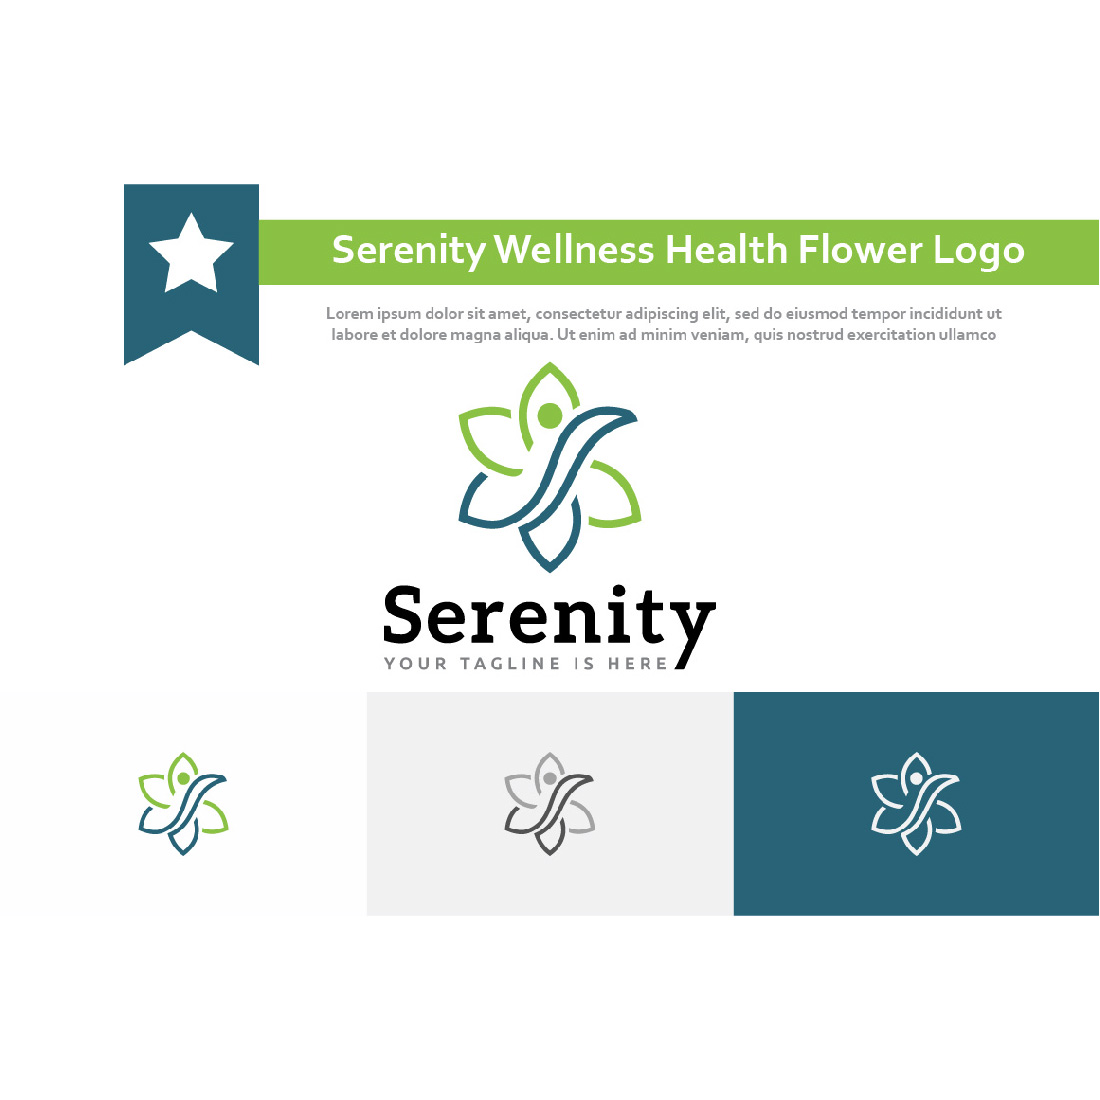 Serenity Wellness Health Flower Nature Abstract Line Logo Example.